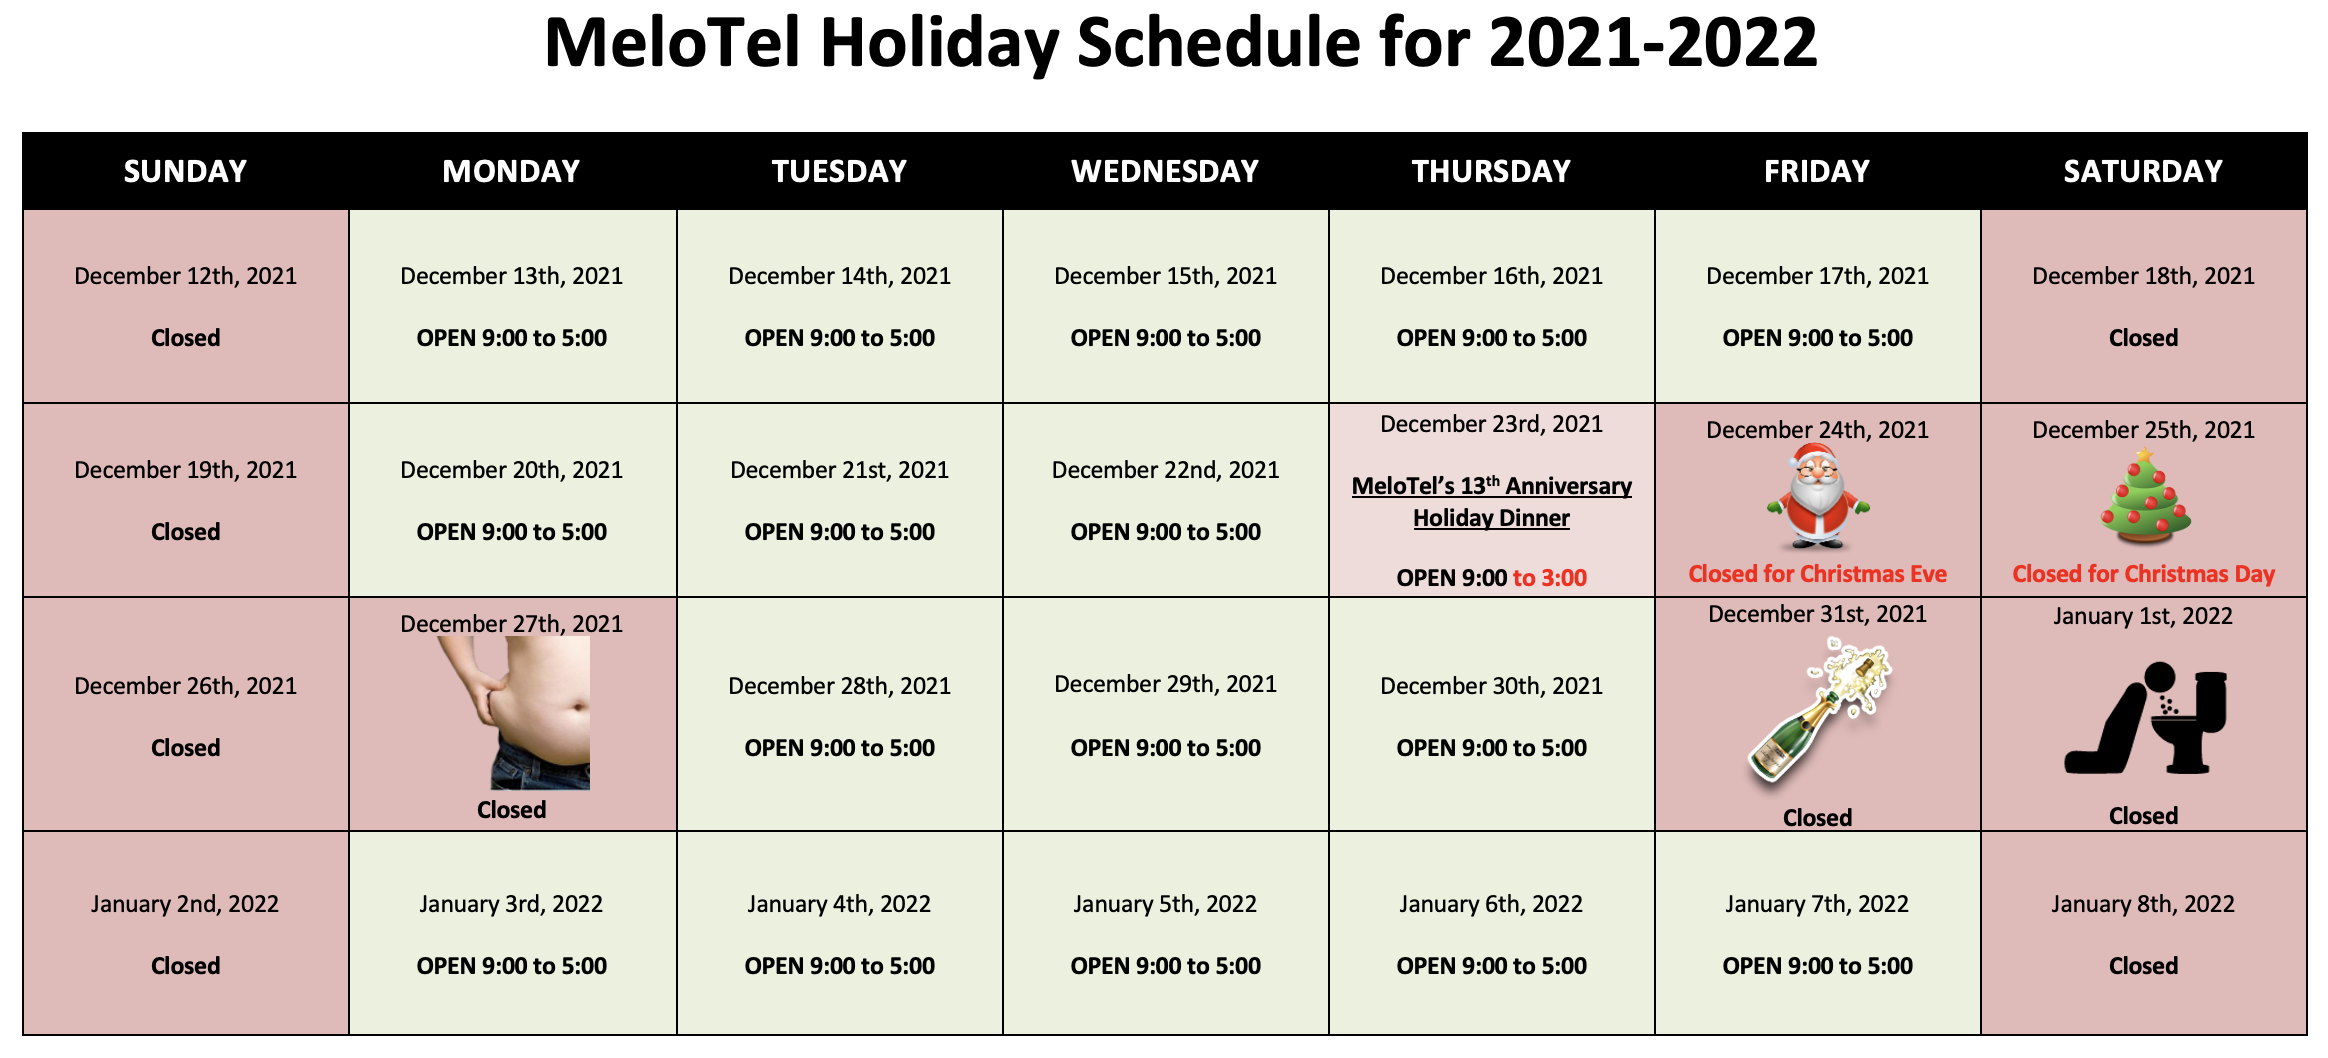 Offering Warm Wishes, Magical Music And MeloTel’s Holiday Schedule!